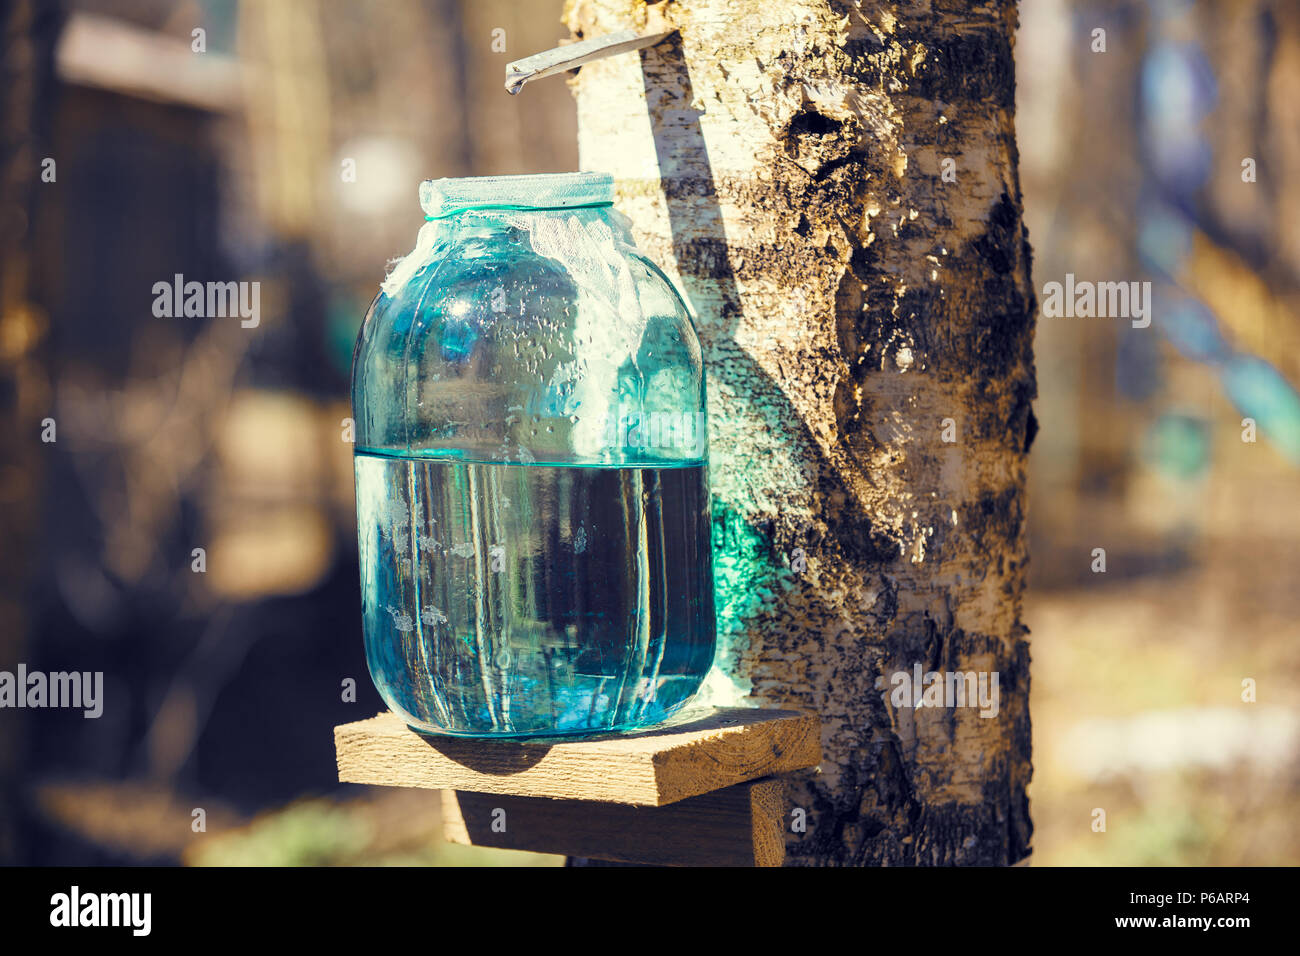 Production of birch sap in the glass jar in the forest. Springtime Stock Photo